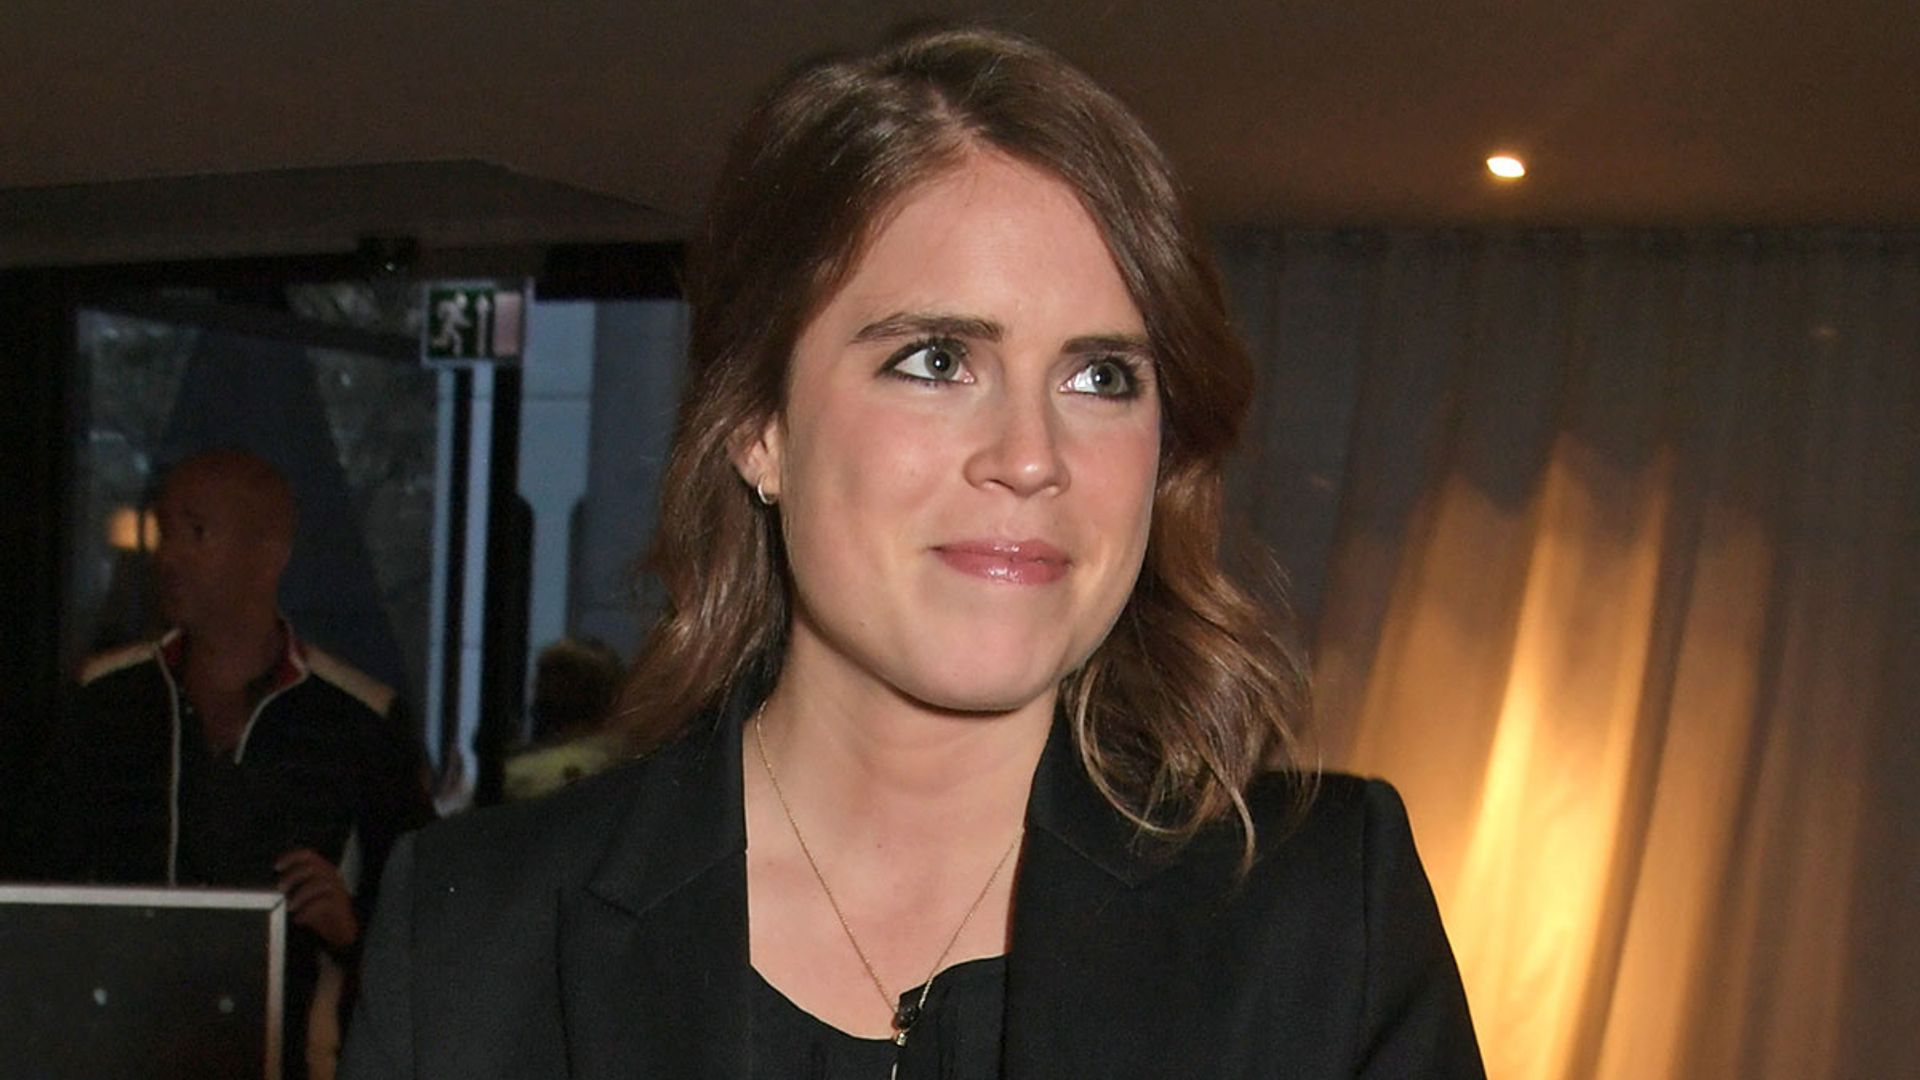 Princess Eugenie borrows sister Princess Beatrice's surprising accessory for night out